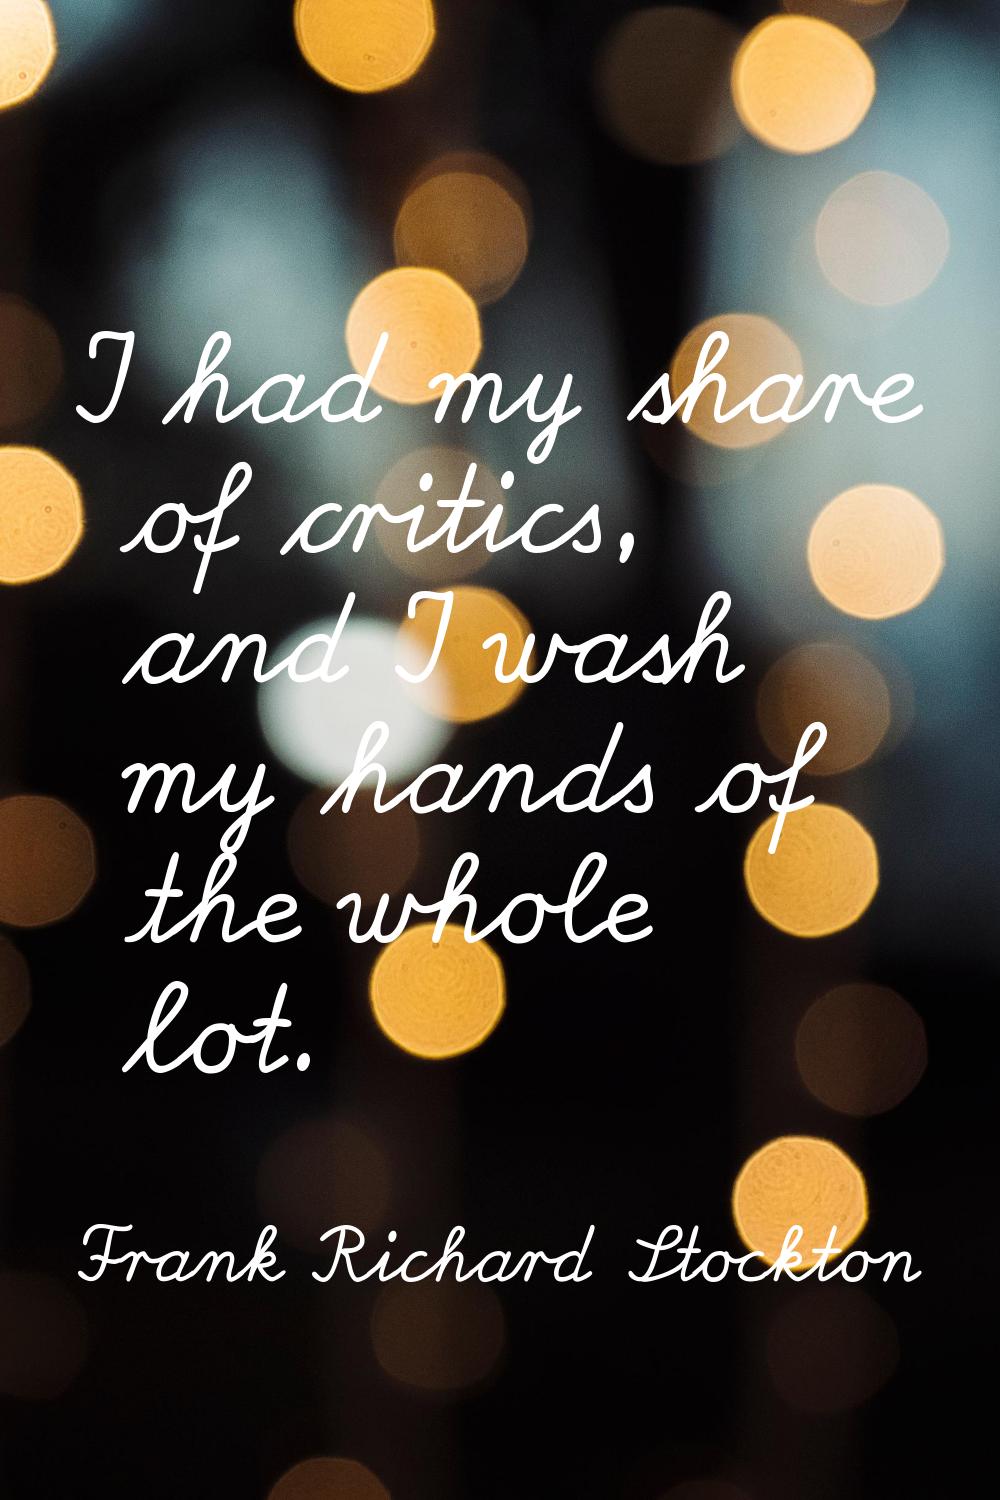 I had my share of critics, and I wash my hands of the whole lot.